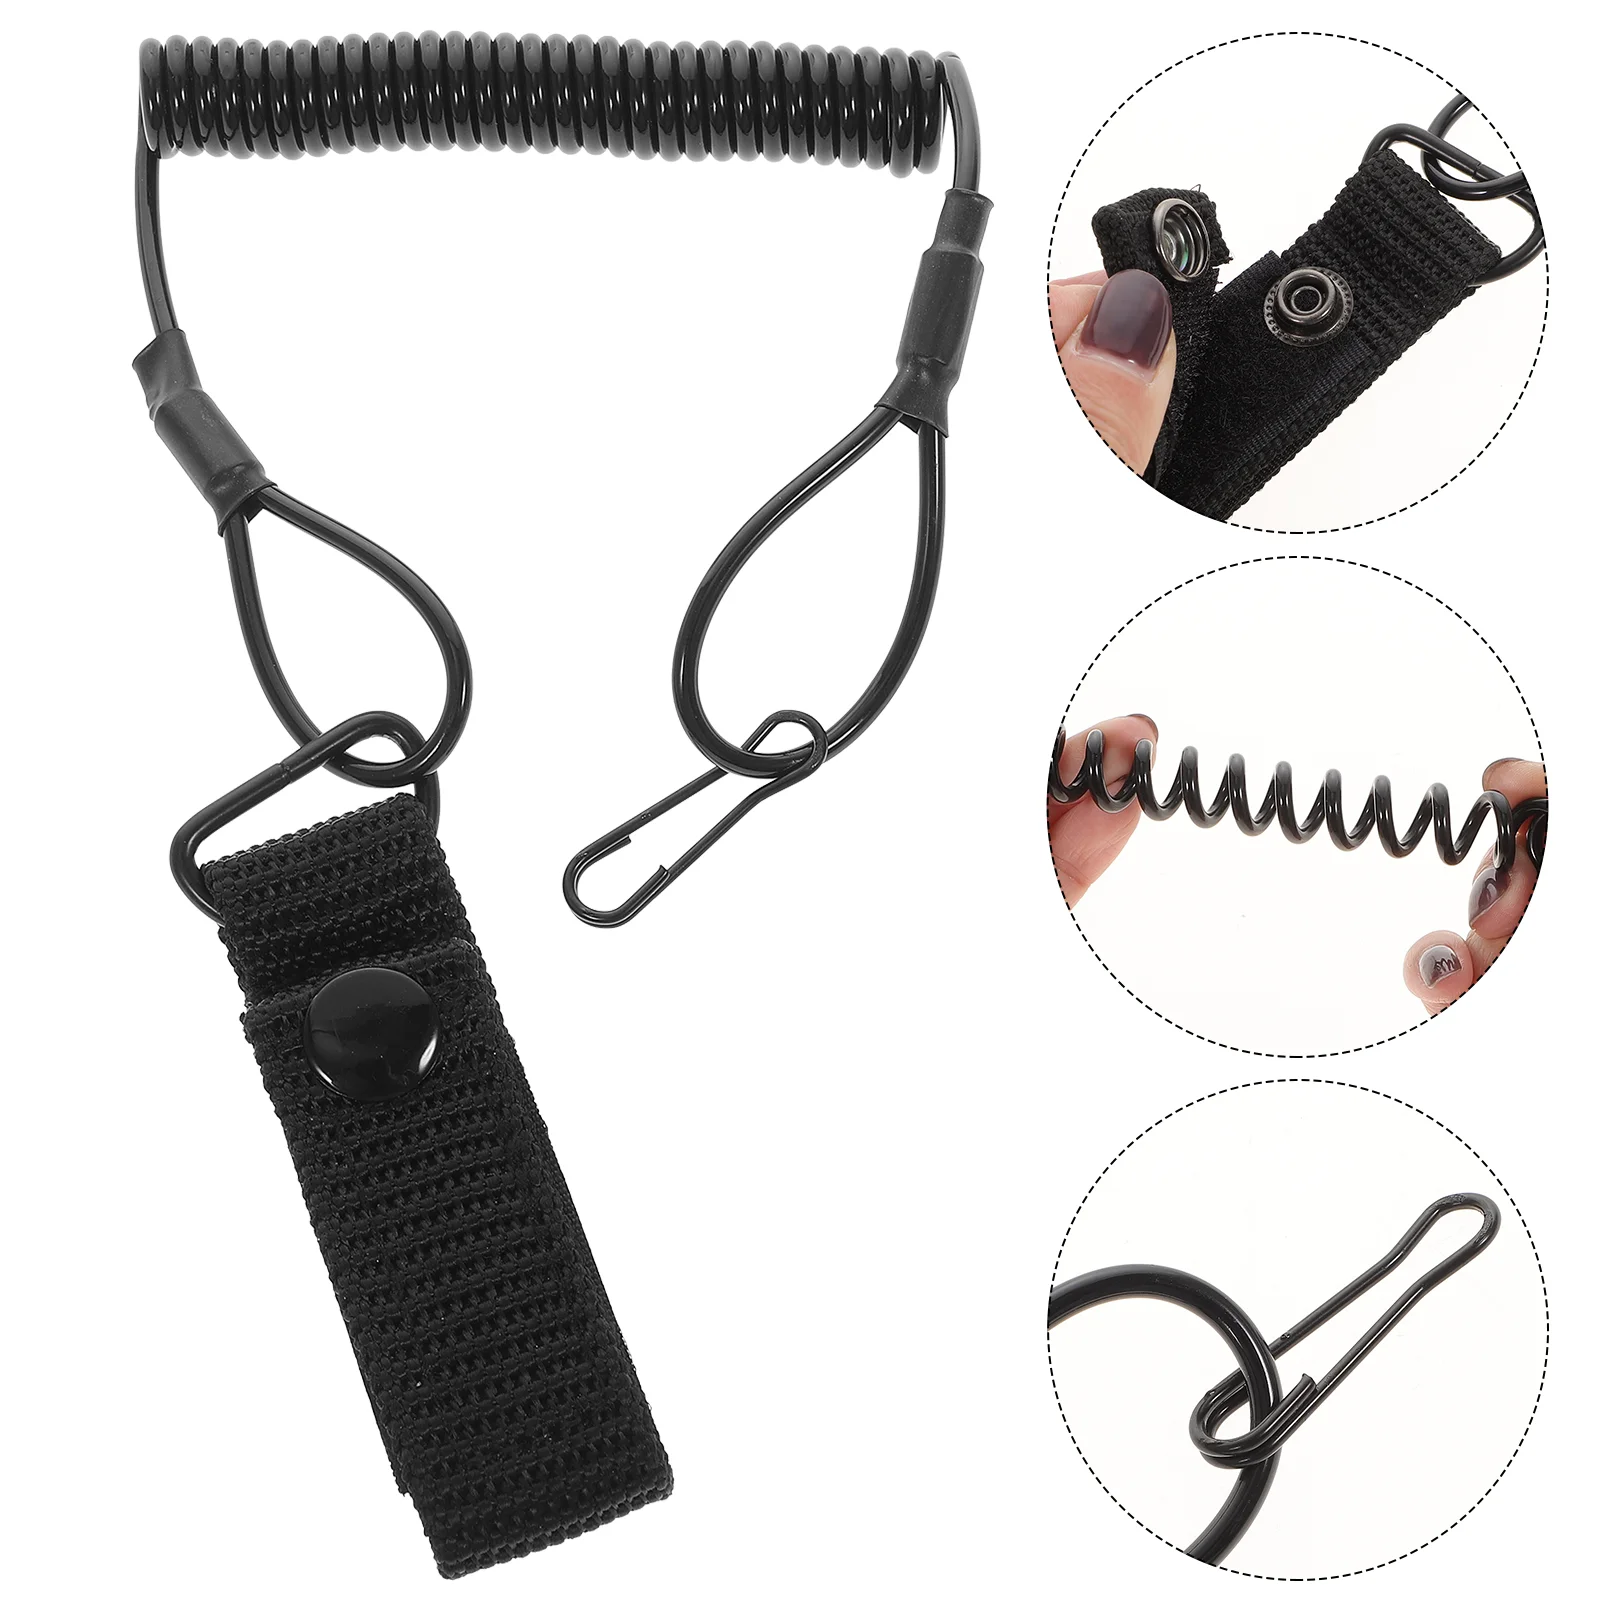 

Anti-fall Spring Rope Retractable Tool Lanyard Clip Bungee Cord Loop Stretchy Coiled Lanyards Tether Safety Roofing Tools